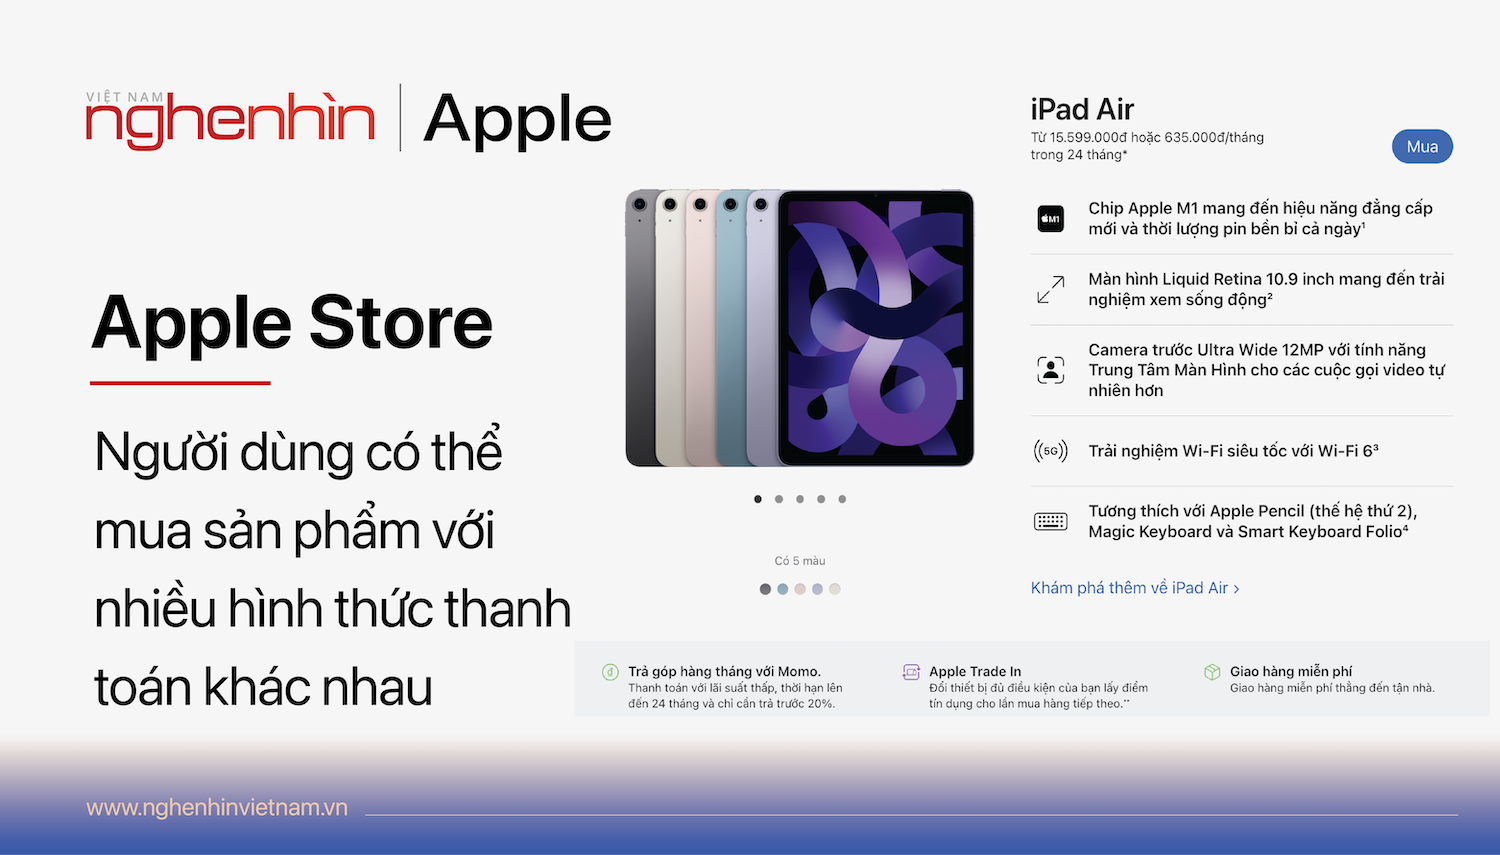 apple-store-truc-tuyen-chinh-thuc-hoat-dong-3.png (490 KB)